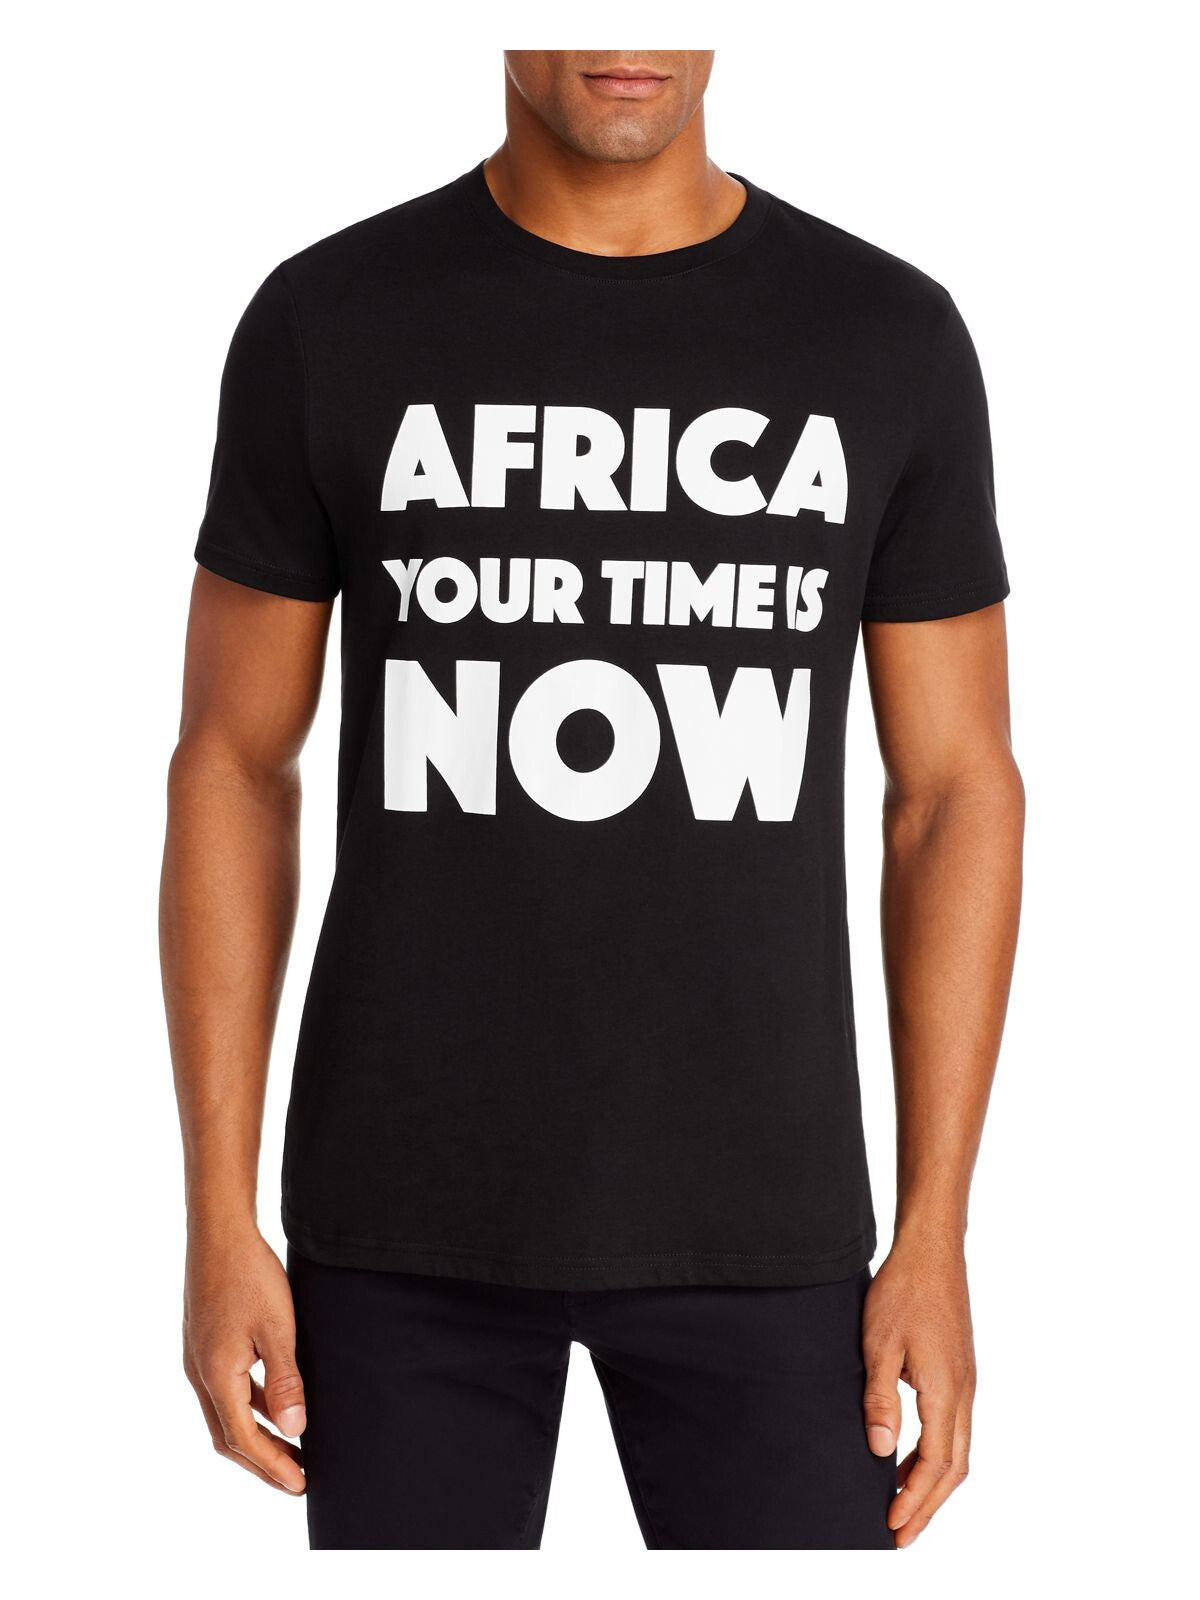 AFRICA YOUR TIME Mens Black Graphic Short Sleeve T-Shirt XL